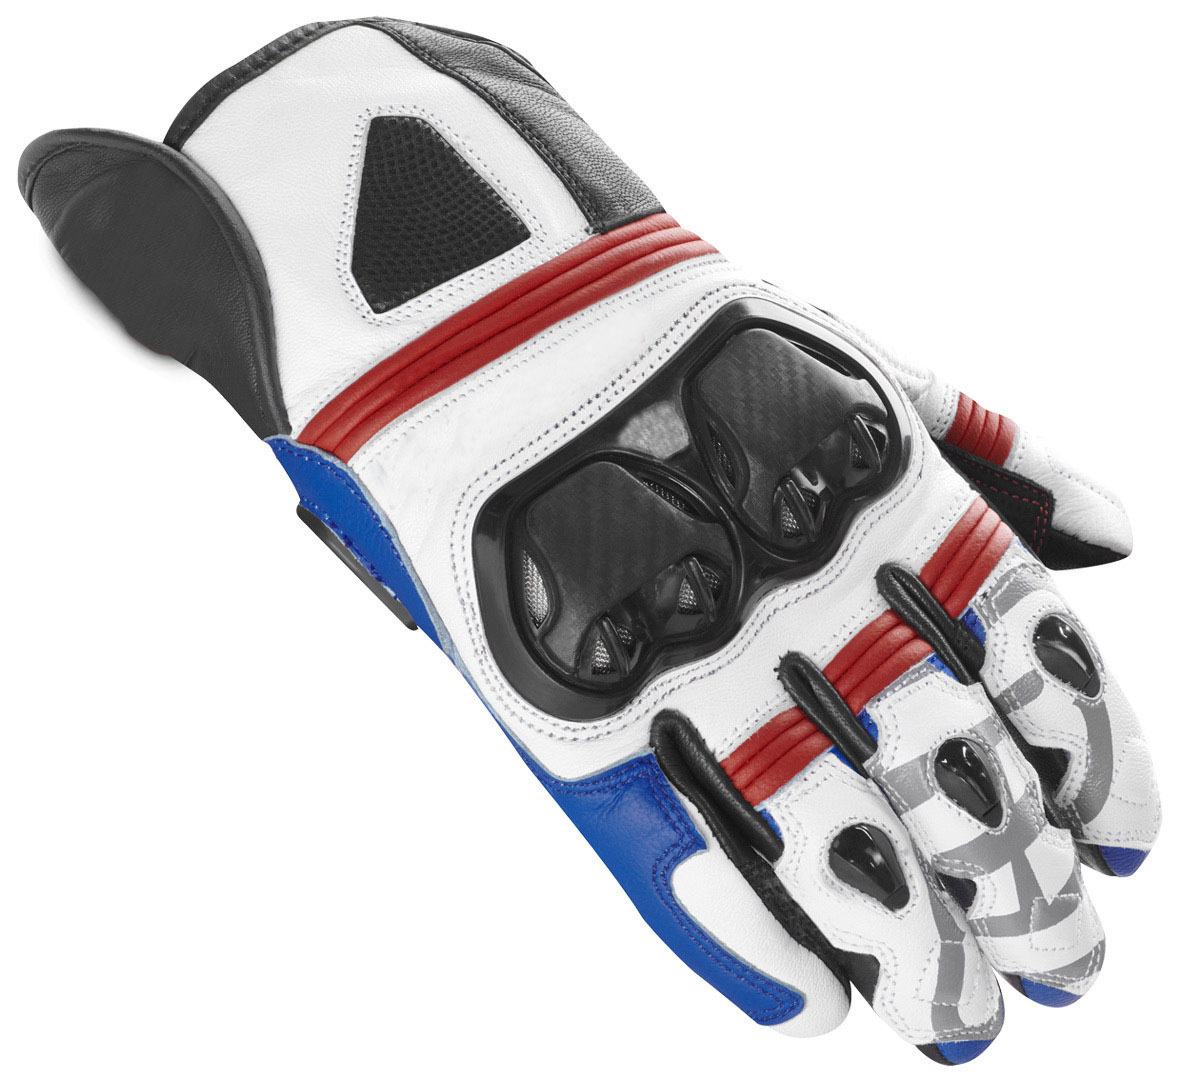 OEM Customized Colorful Long Cuff Leather Motorcycle Sports Gloves Hands protective Windproof Goatsk